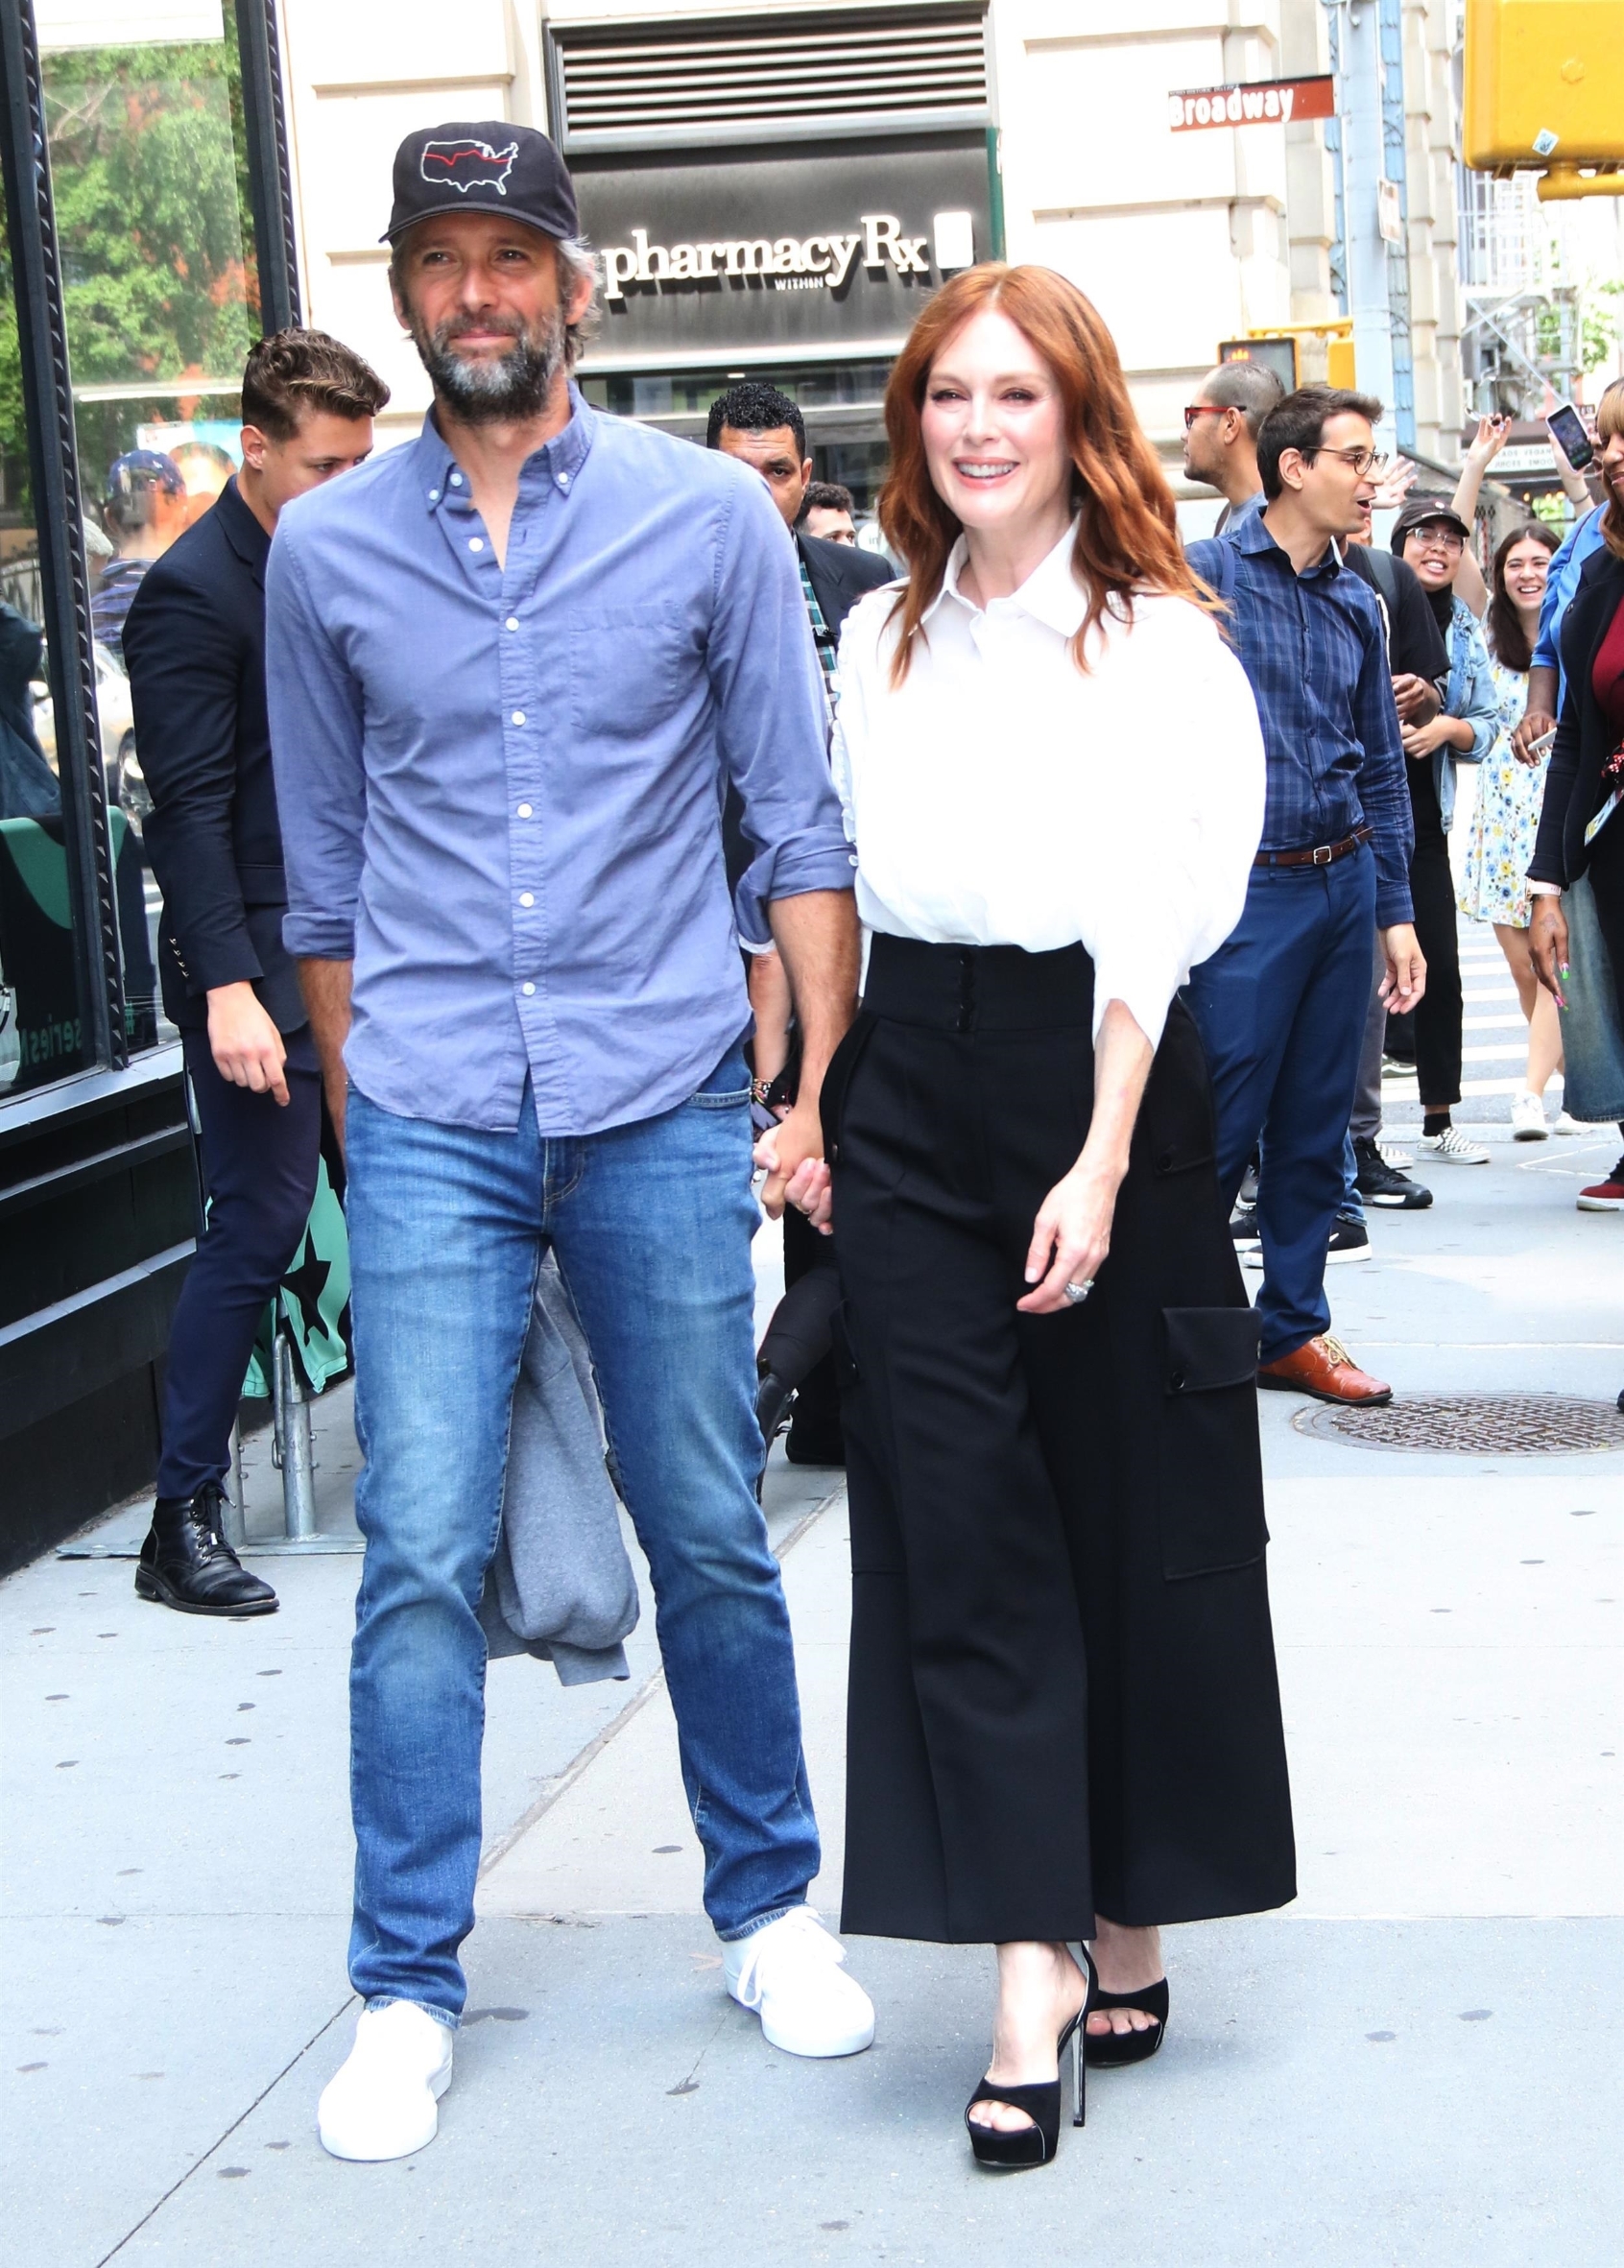 New York, NY  - Film director Bart Freundlich and actress wife Julianne Moore join the cast of 